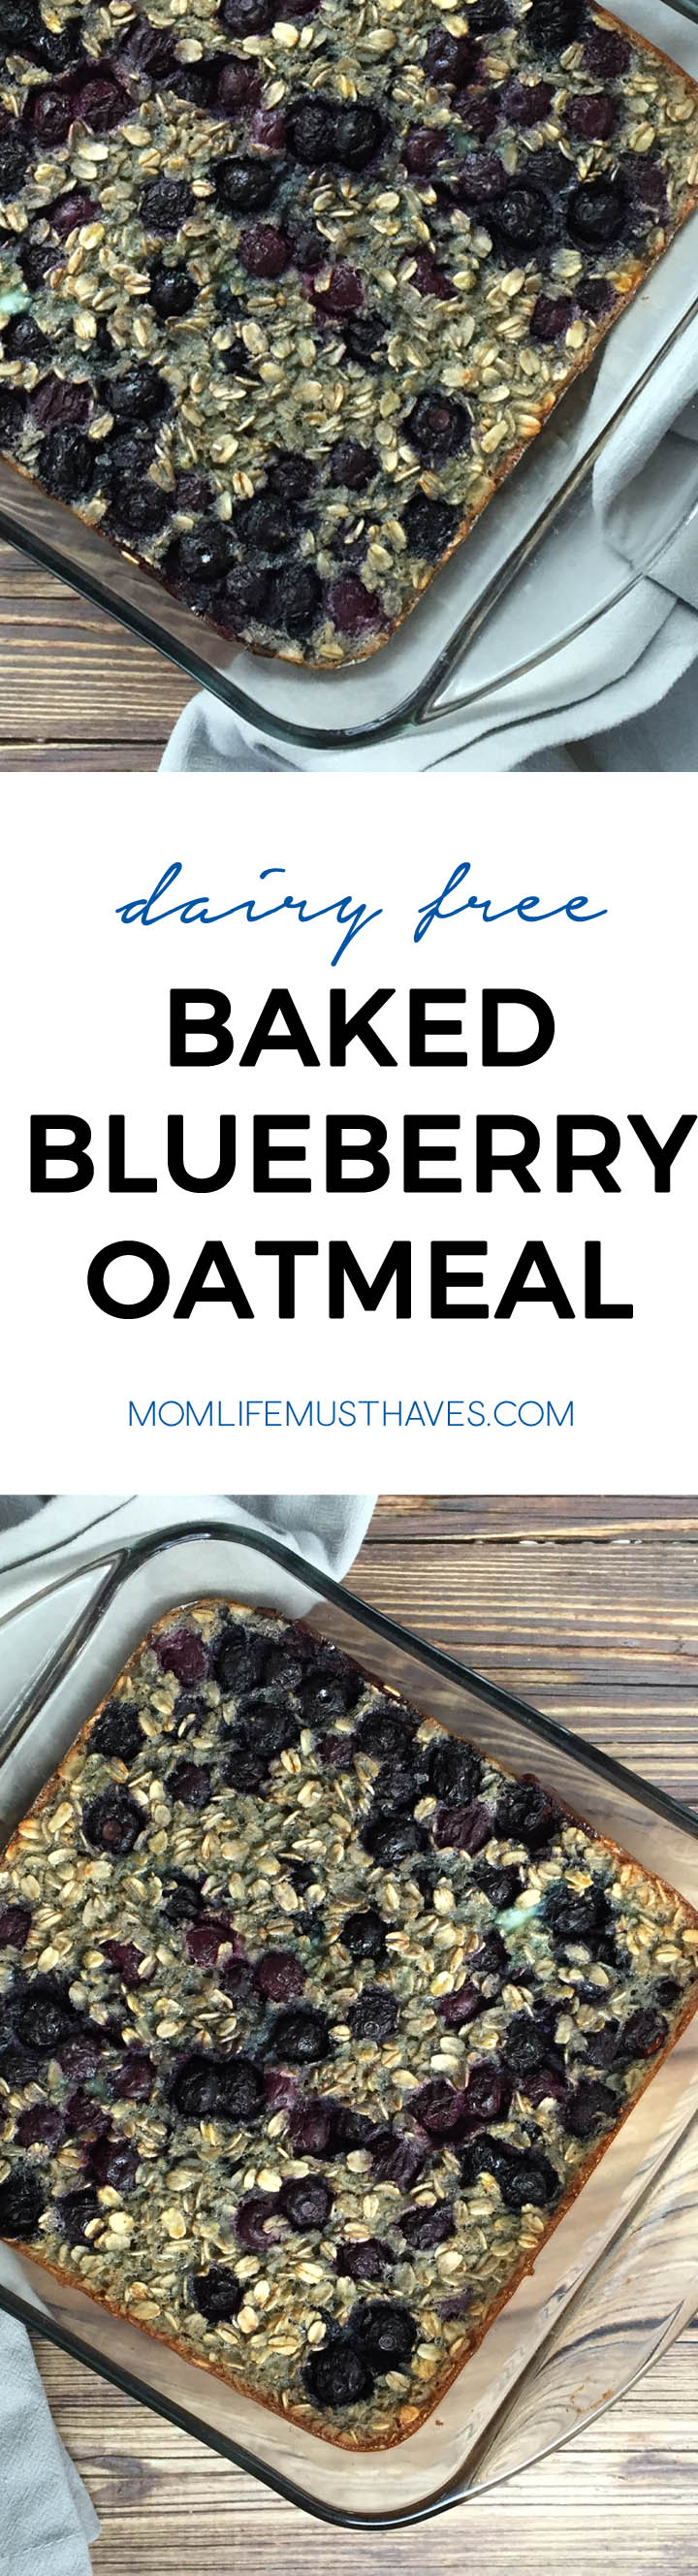 Dairy free blueberry baked oatmeal, an easy grab and go breakfast for moms and kids // momlifemusthaves.com